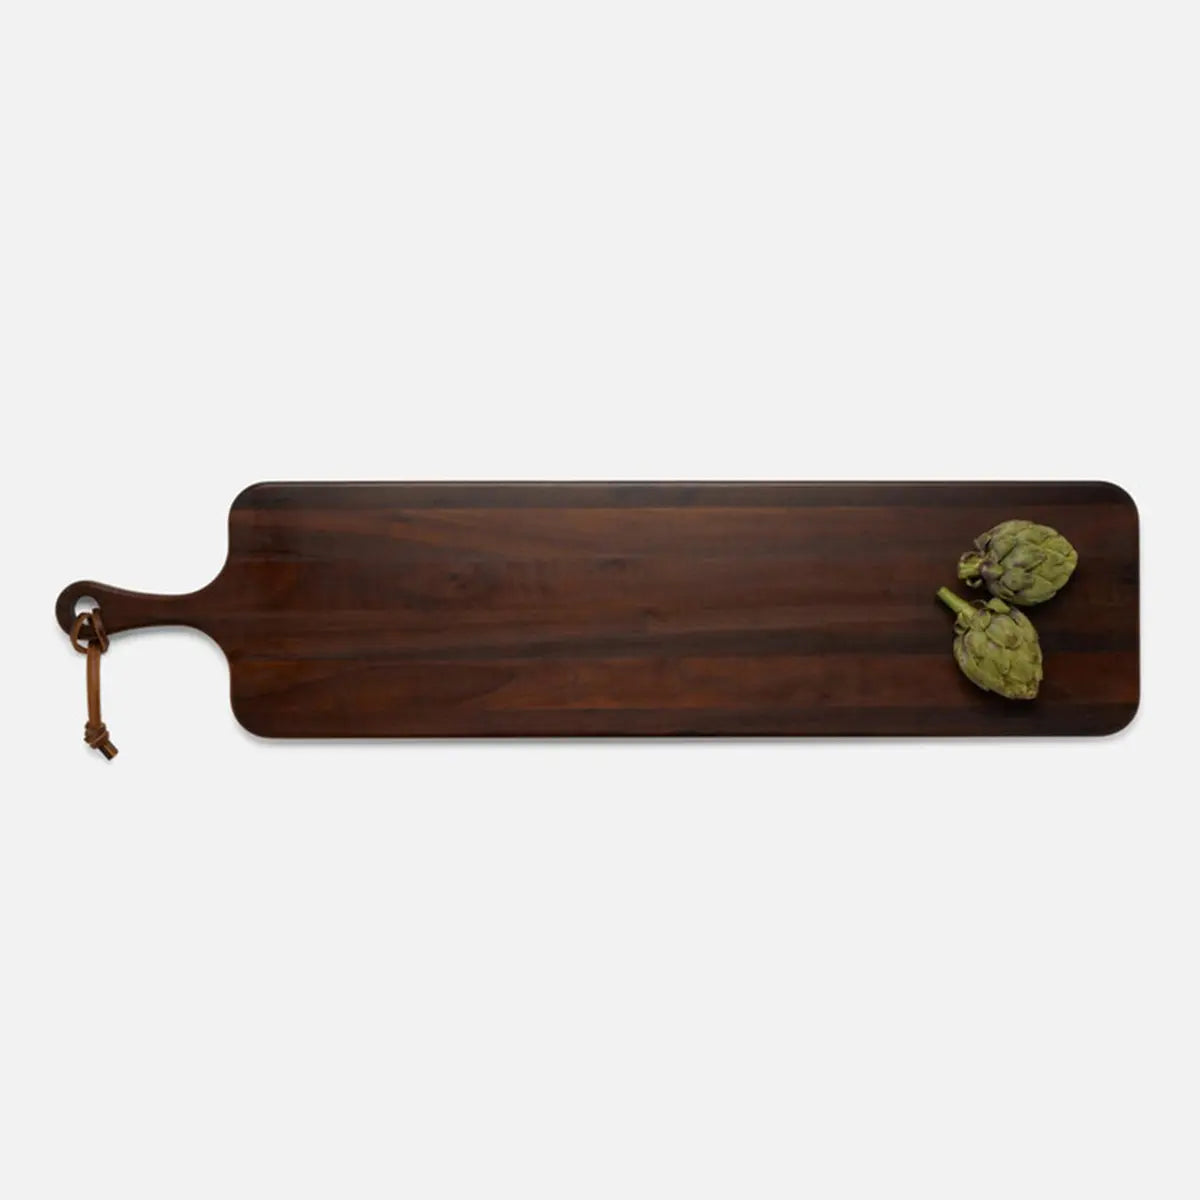 Blue Pheasant Edmund Natural Walnut Serving Board with two artichokes on top